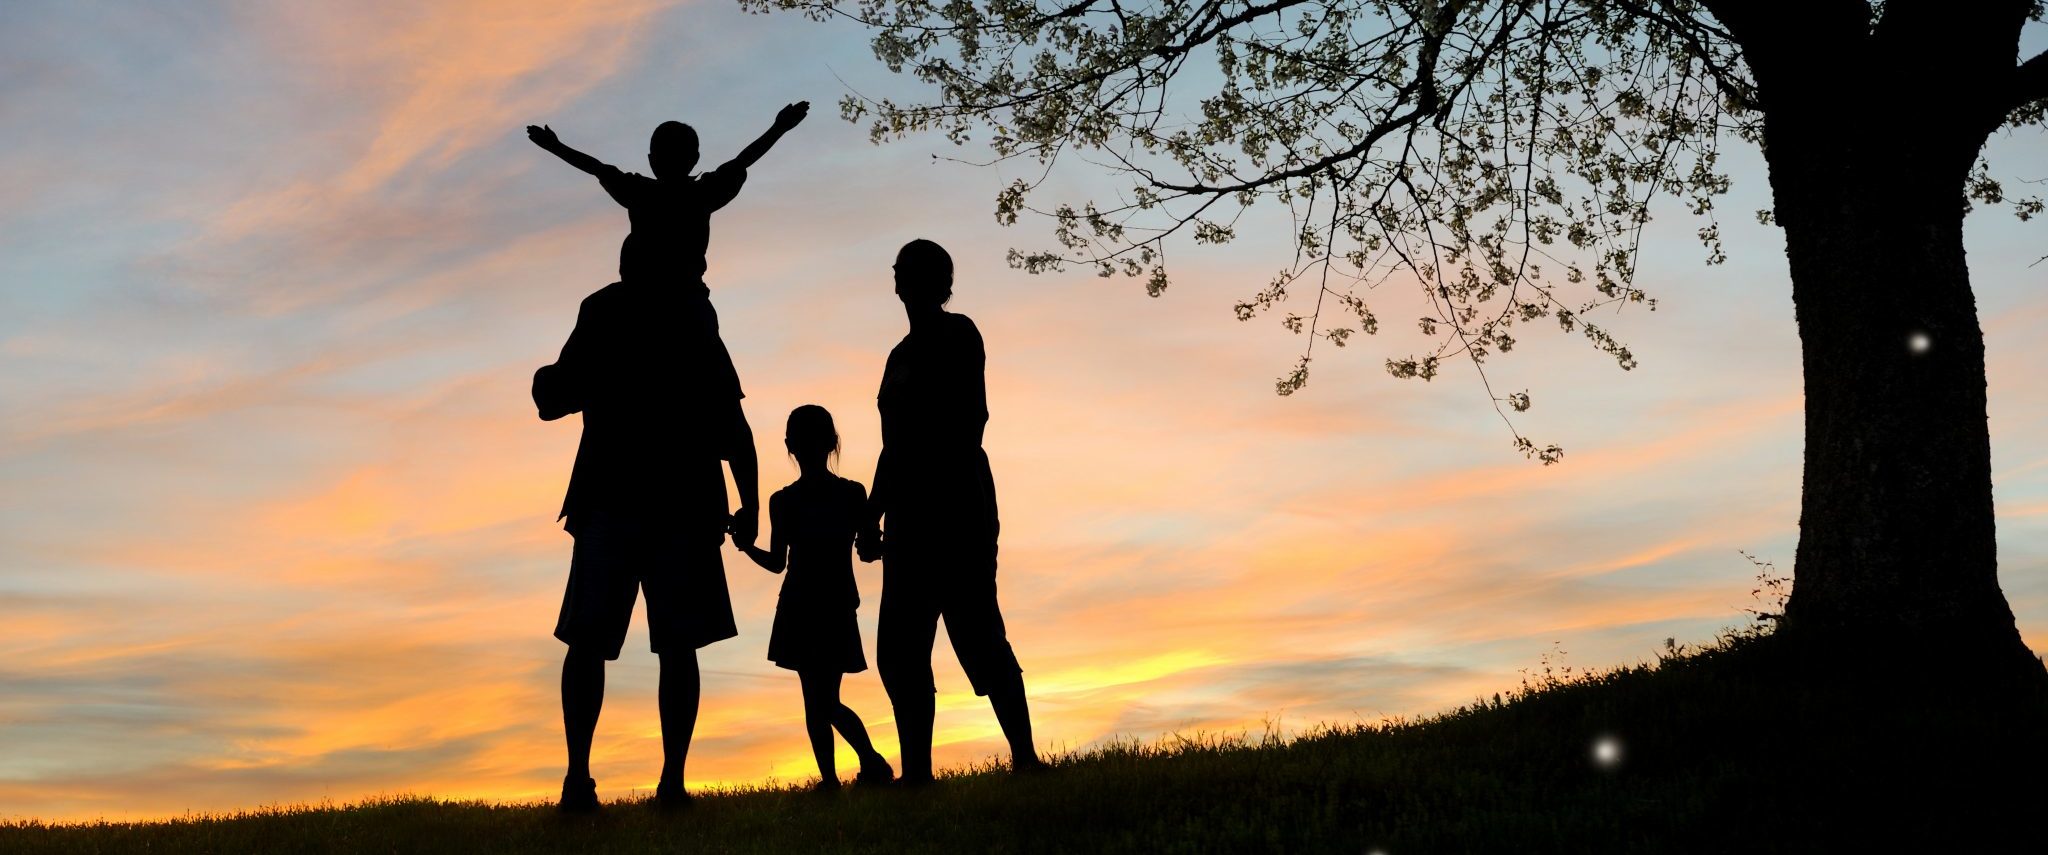 Adoption Centre of British Columbia - Photo of a happy family against a sunset with a tree